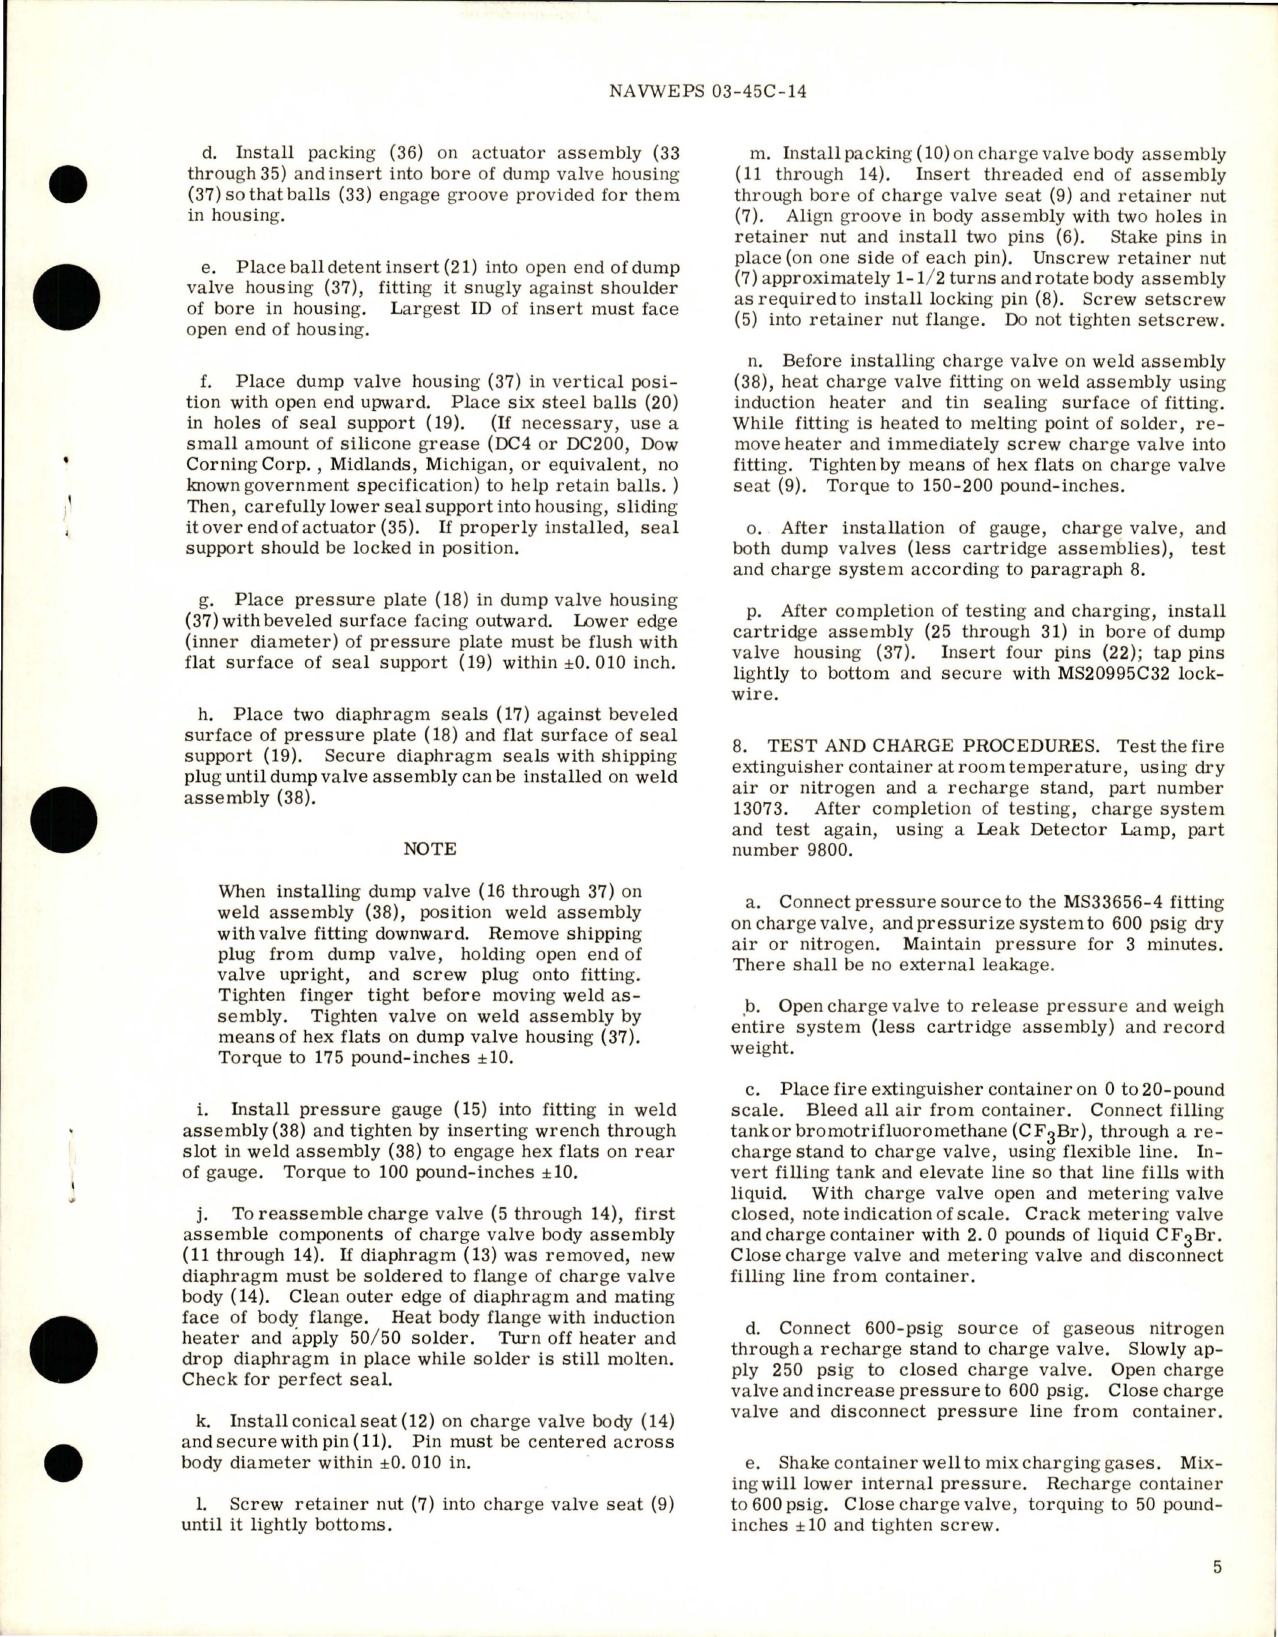 Sample page 5 from AirCorps Library document: Overhaul Instructions with Parts for Dual Squib - Dual Outlet Fire Extinguisher Container - Part 2911115-1